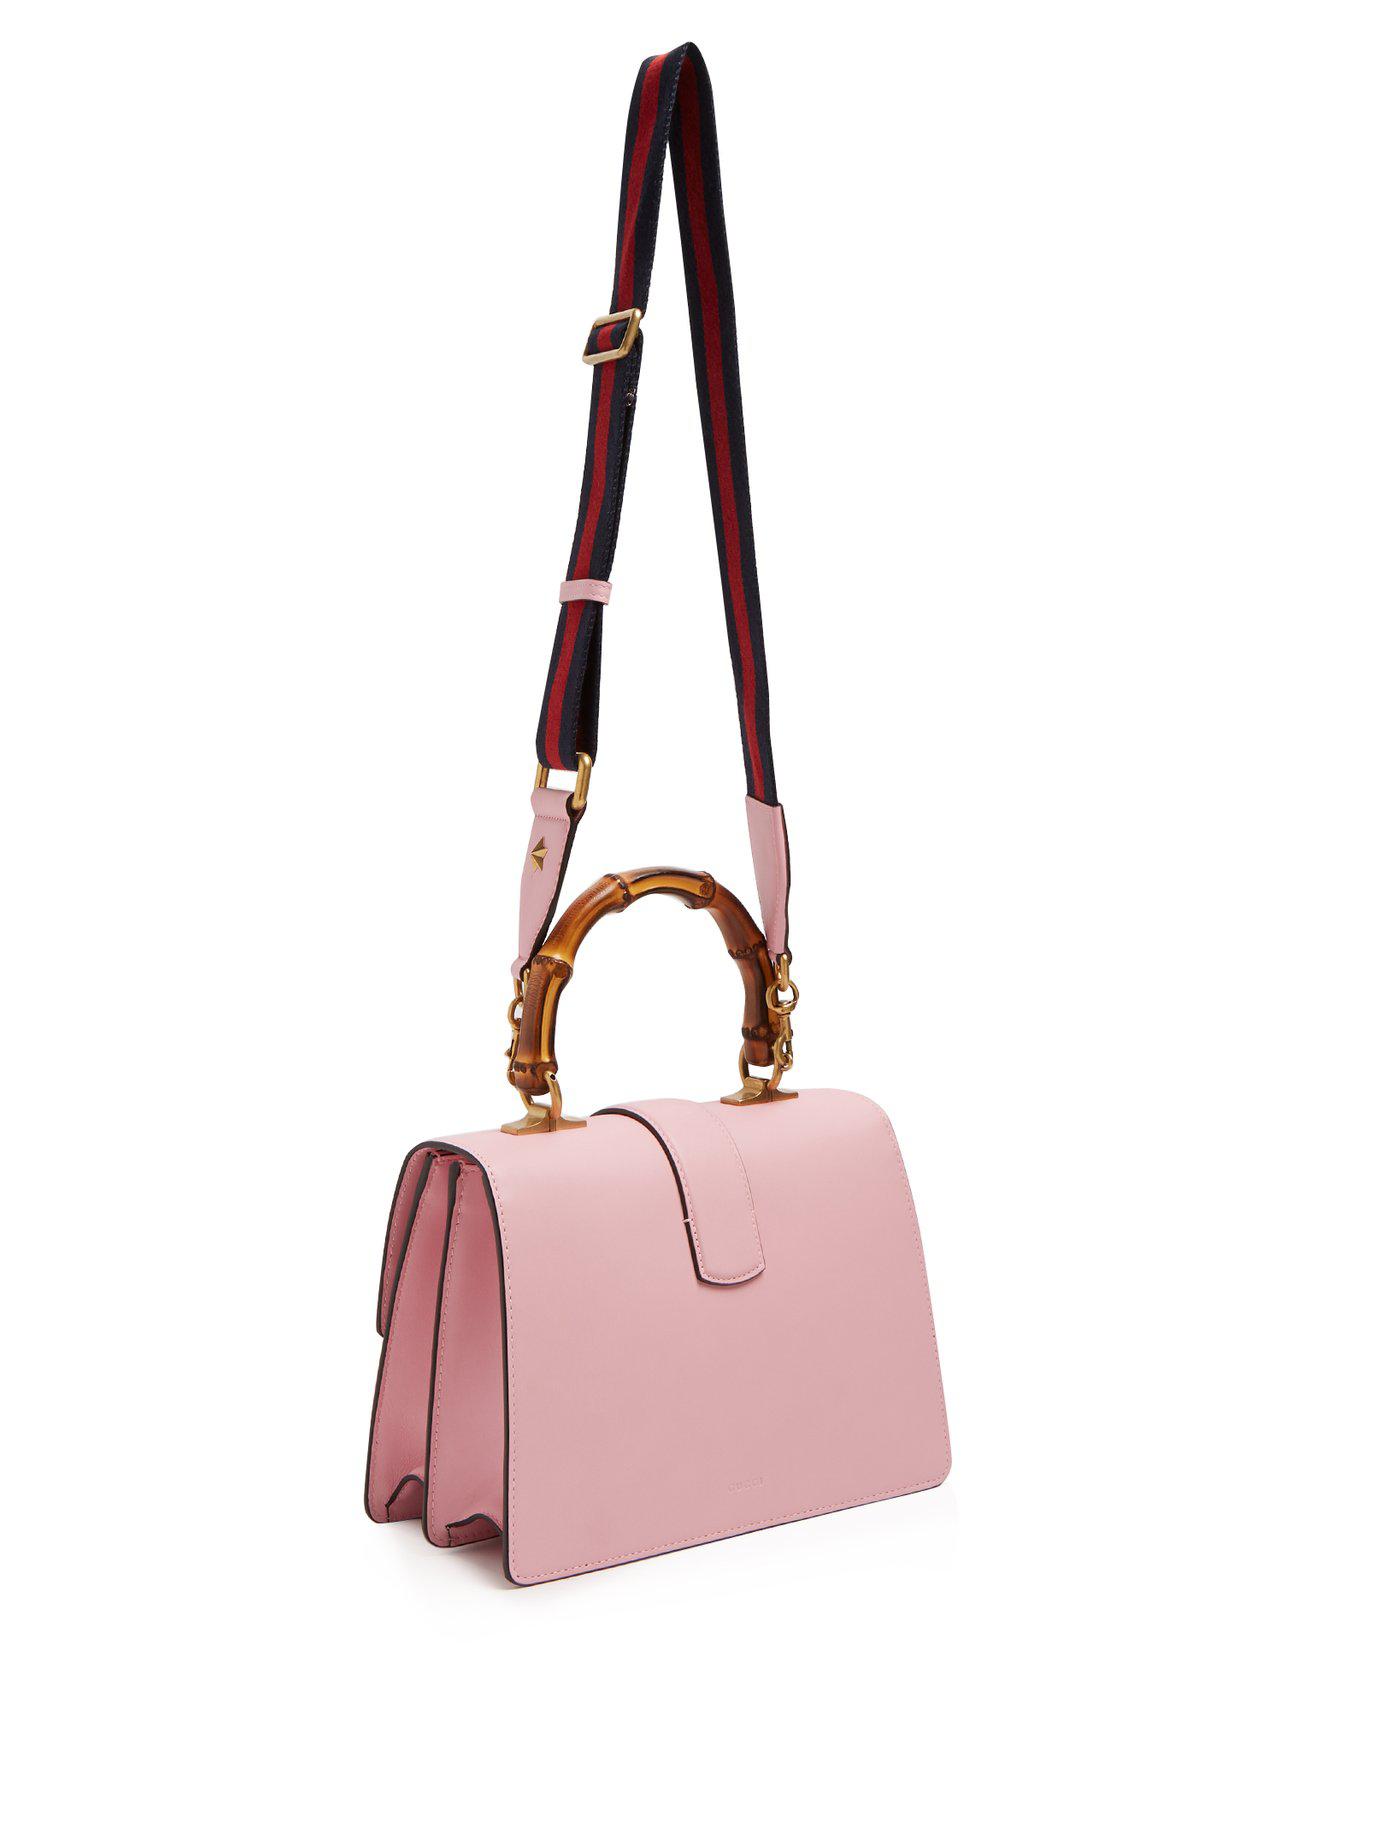 Gucci Dionysus Medium Bamboo Handle Leather Bag in Pink - Lyst